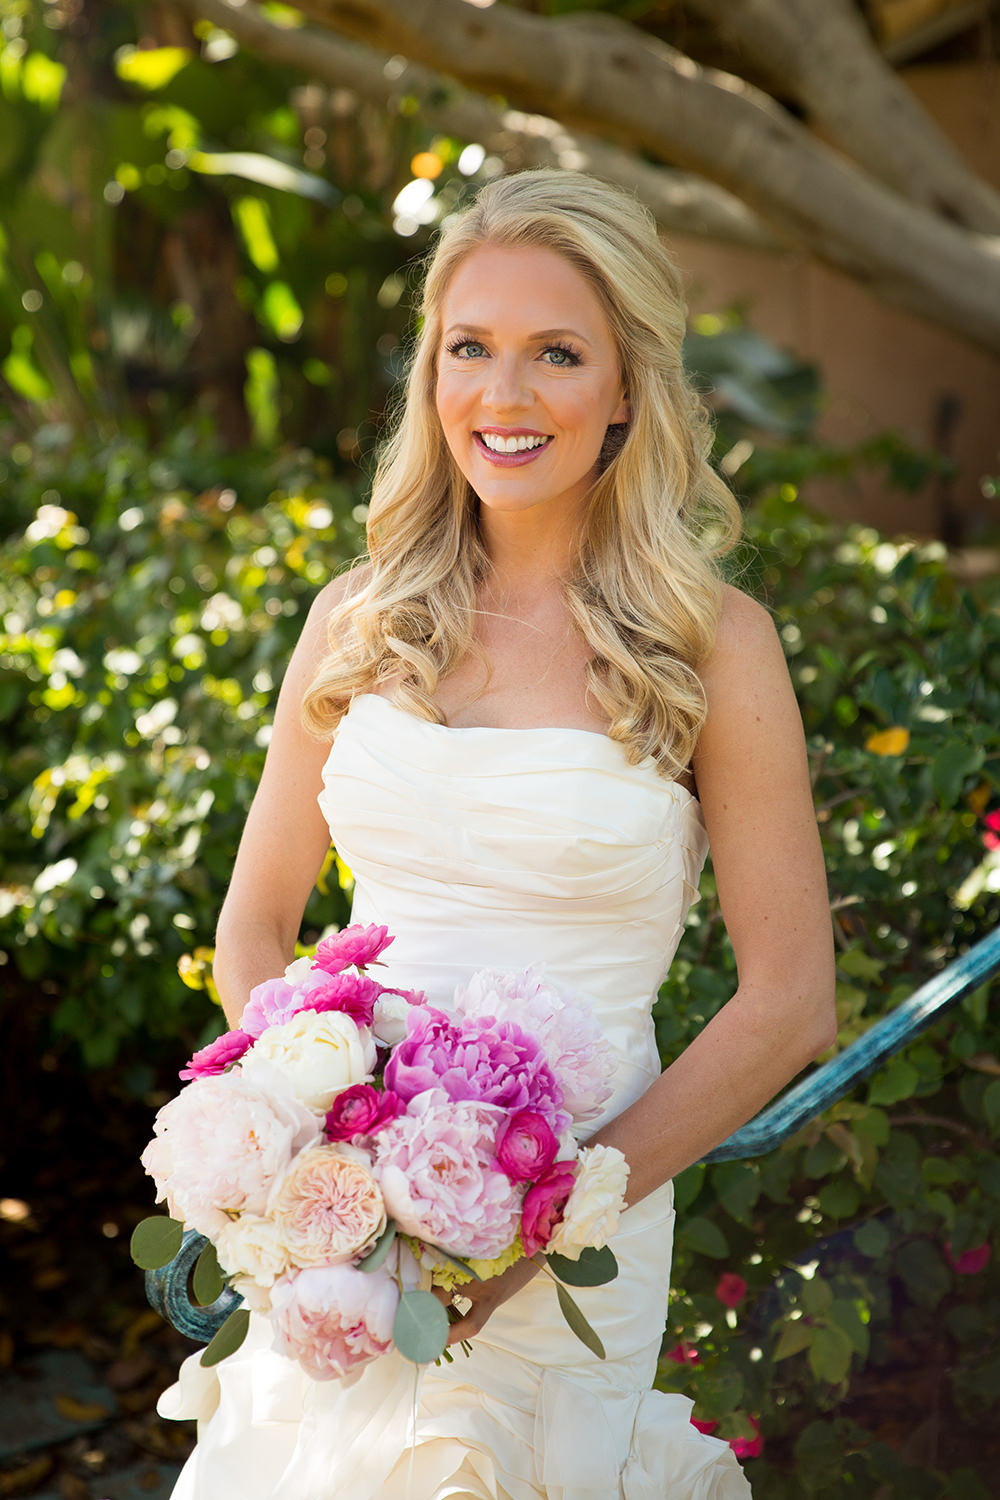 Beautiful blond bride with a pink toned bouquet